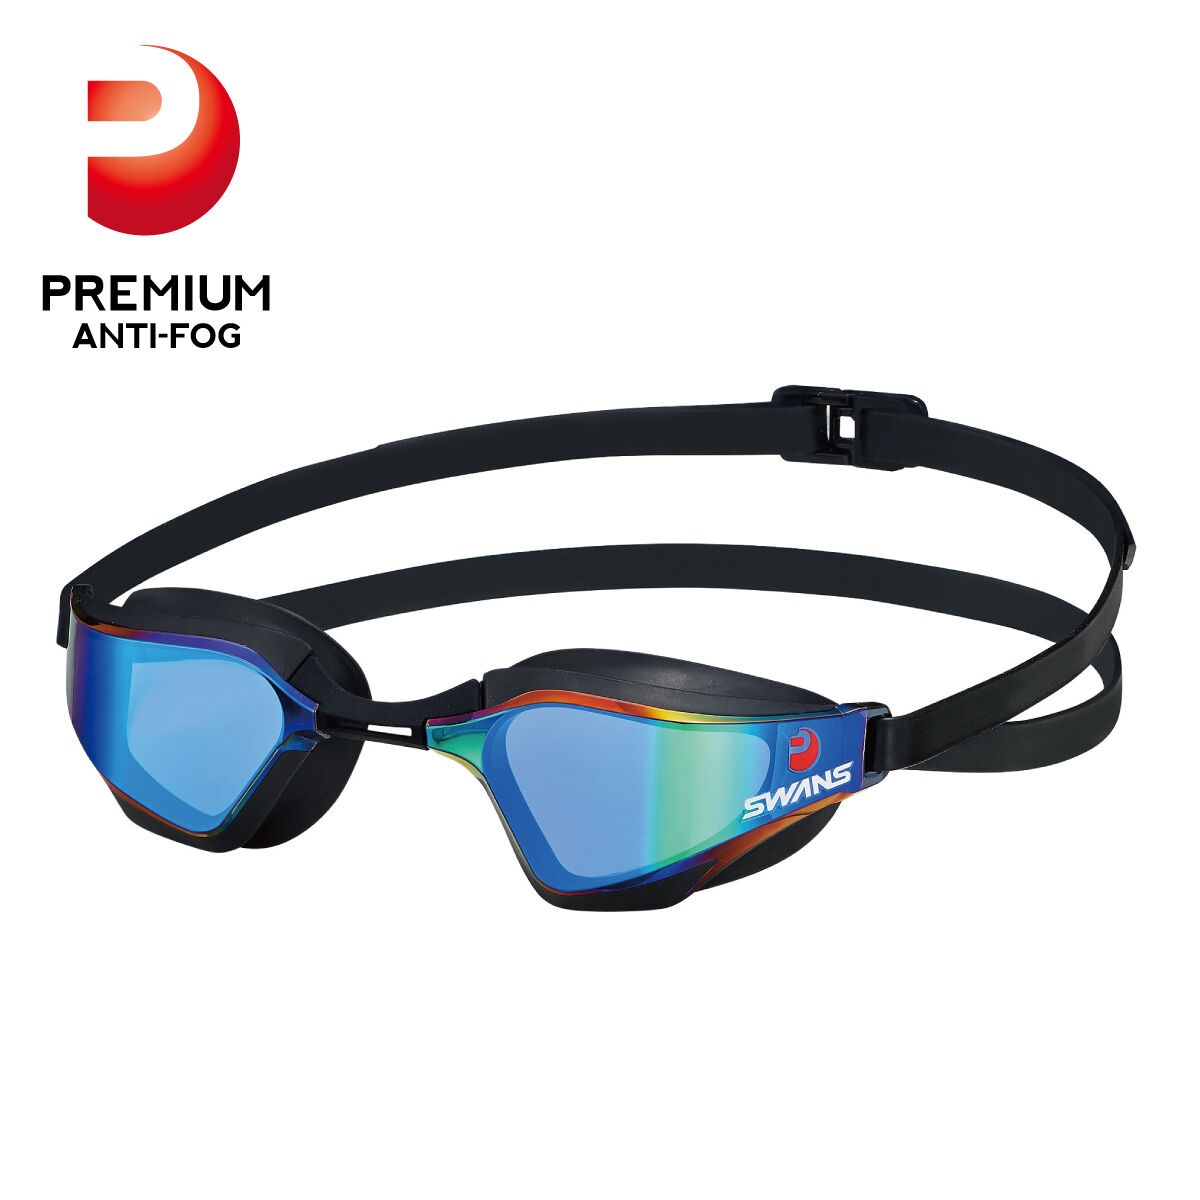 SWANS competitive swimming goggles Valkyrie PREMIUM mirror lens 